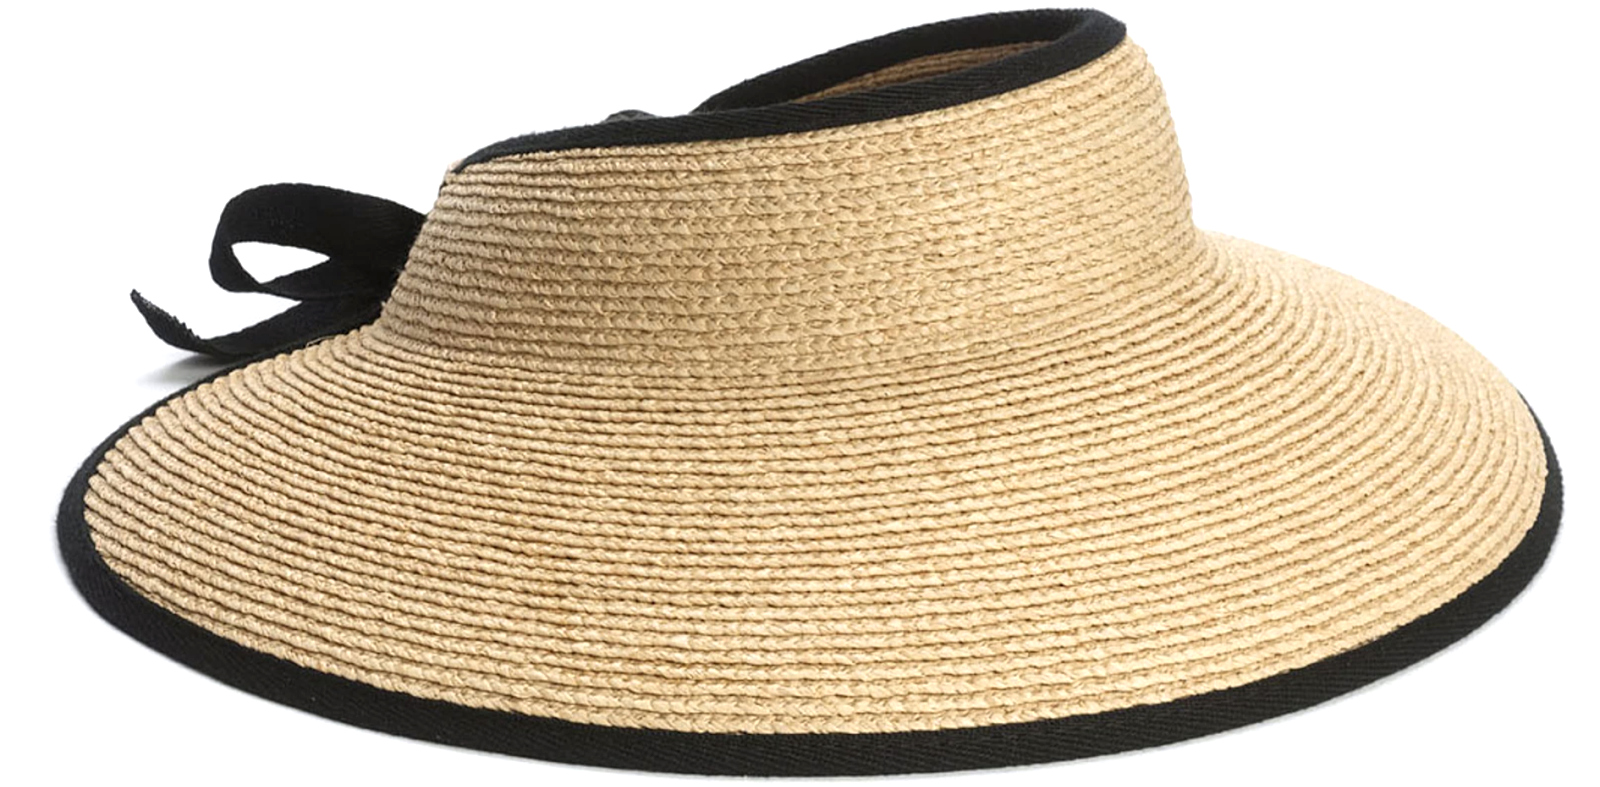 Salt Armour Quality Straw Hat LIFE's A BEACH Hat UV Protects Wind Resist 